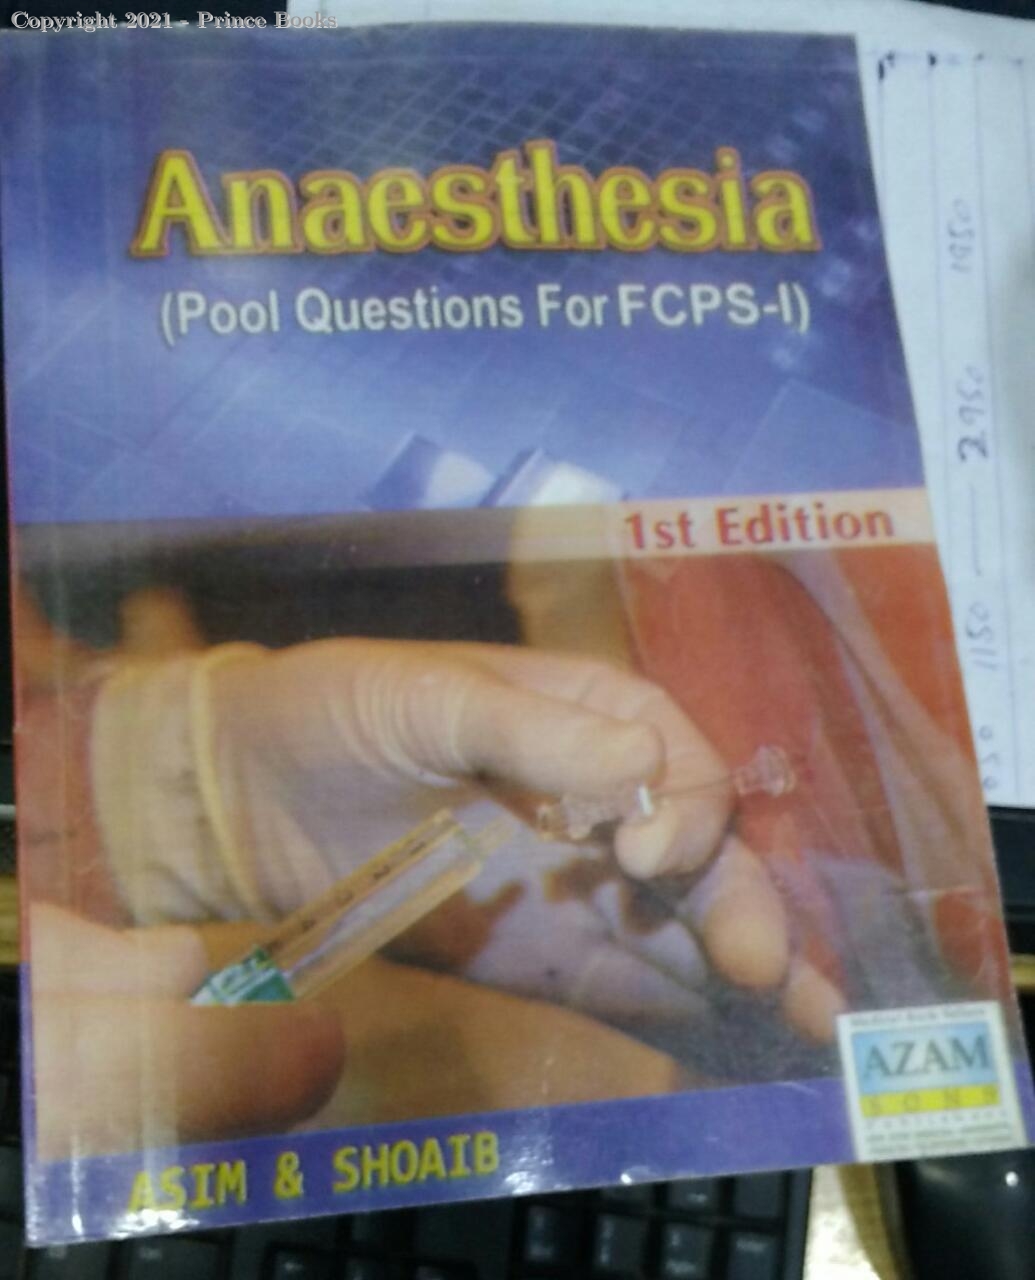 ANAESTHESIA POOL QUESTIONS FOR FCPS - 1, 1ED